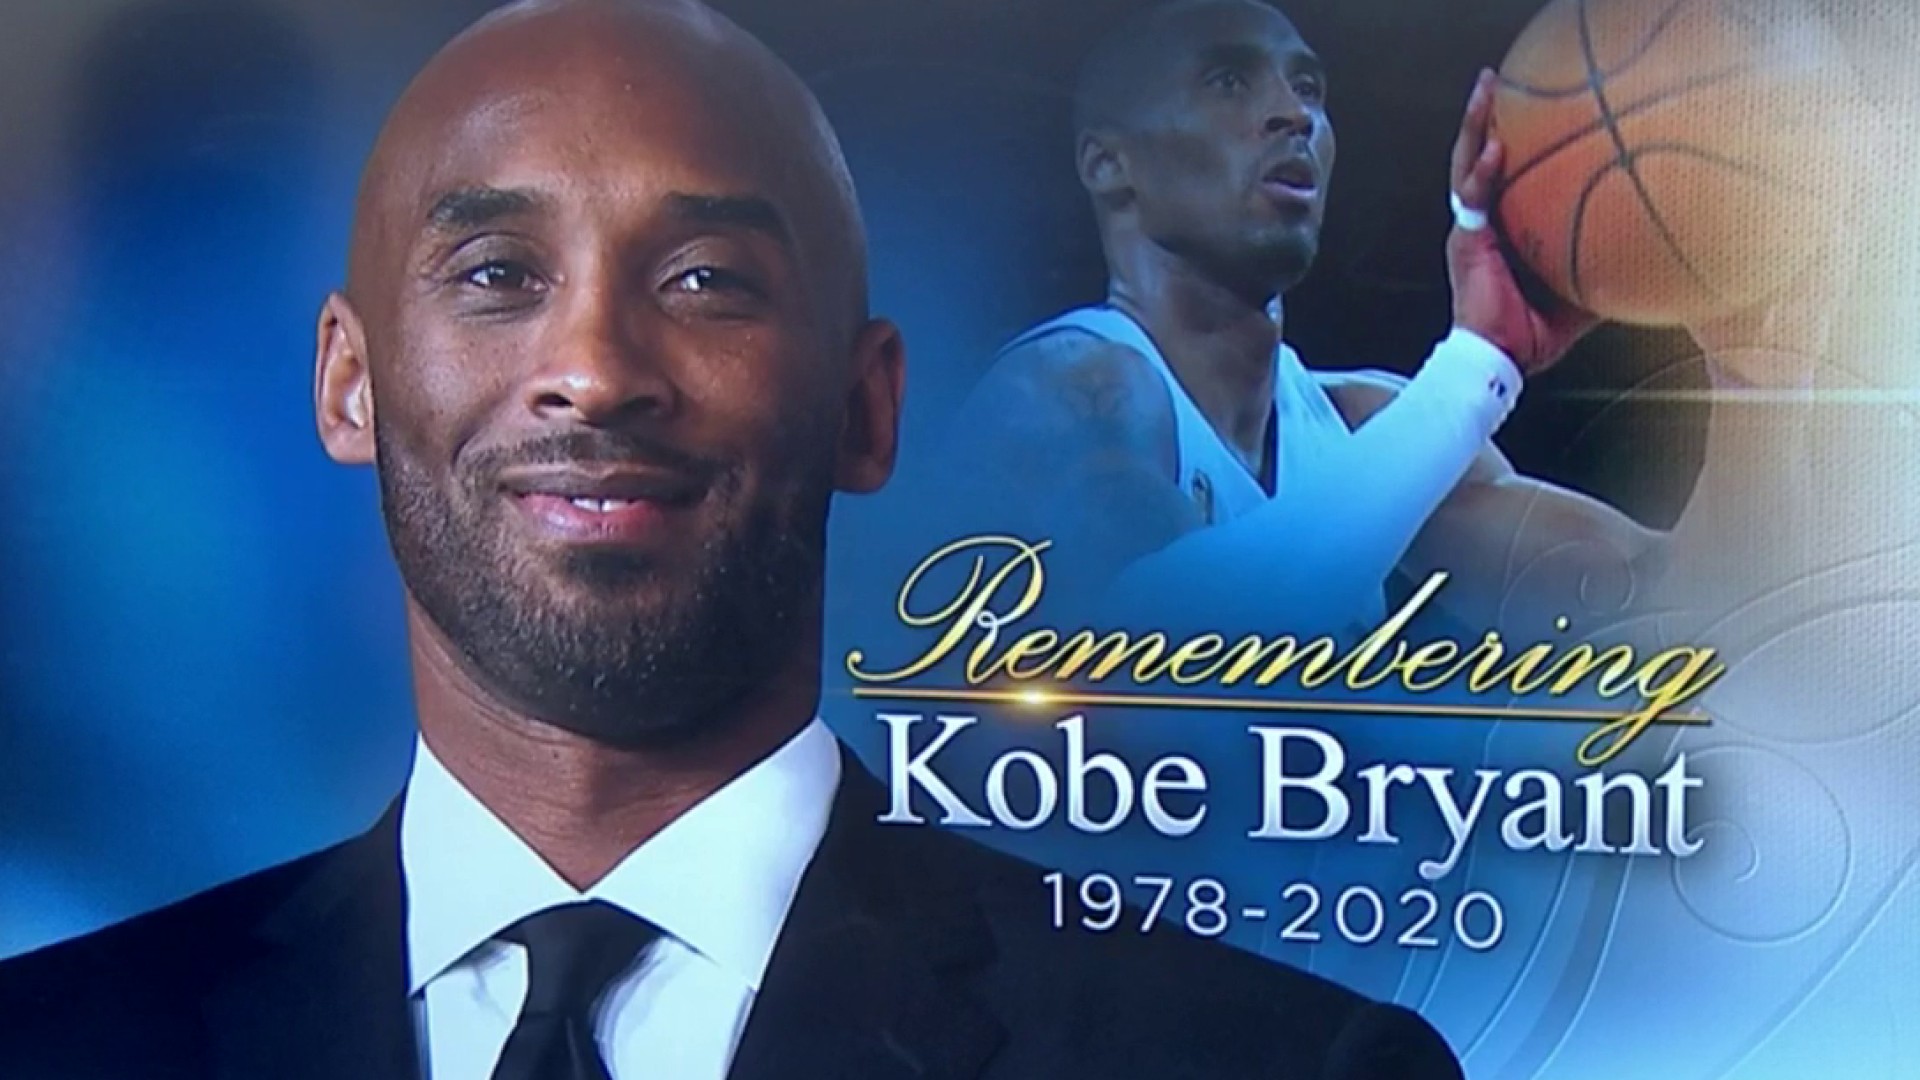 Kobe Bryant, daughter killed in helicopter crash; 7 others dead